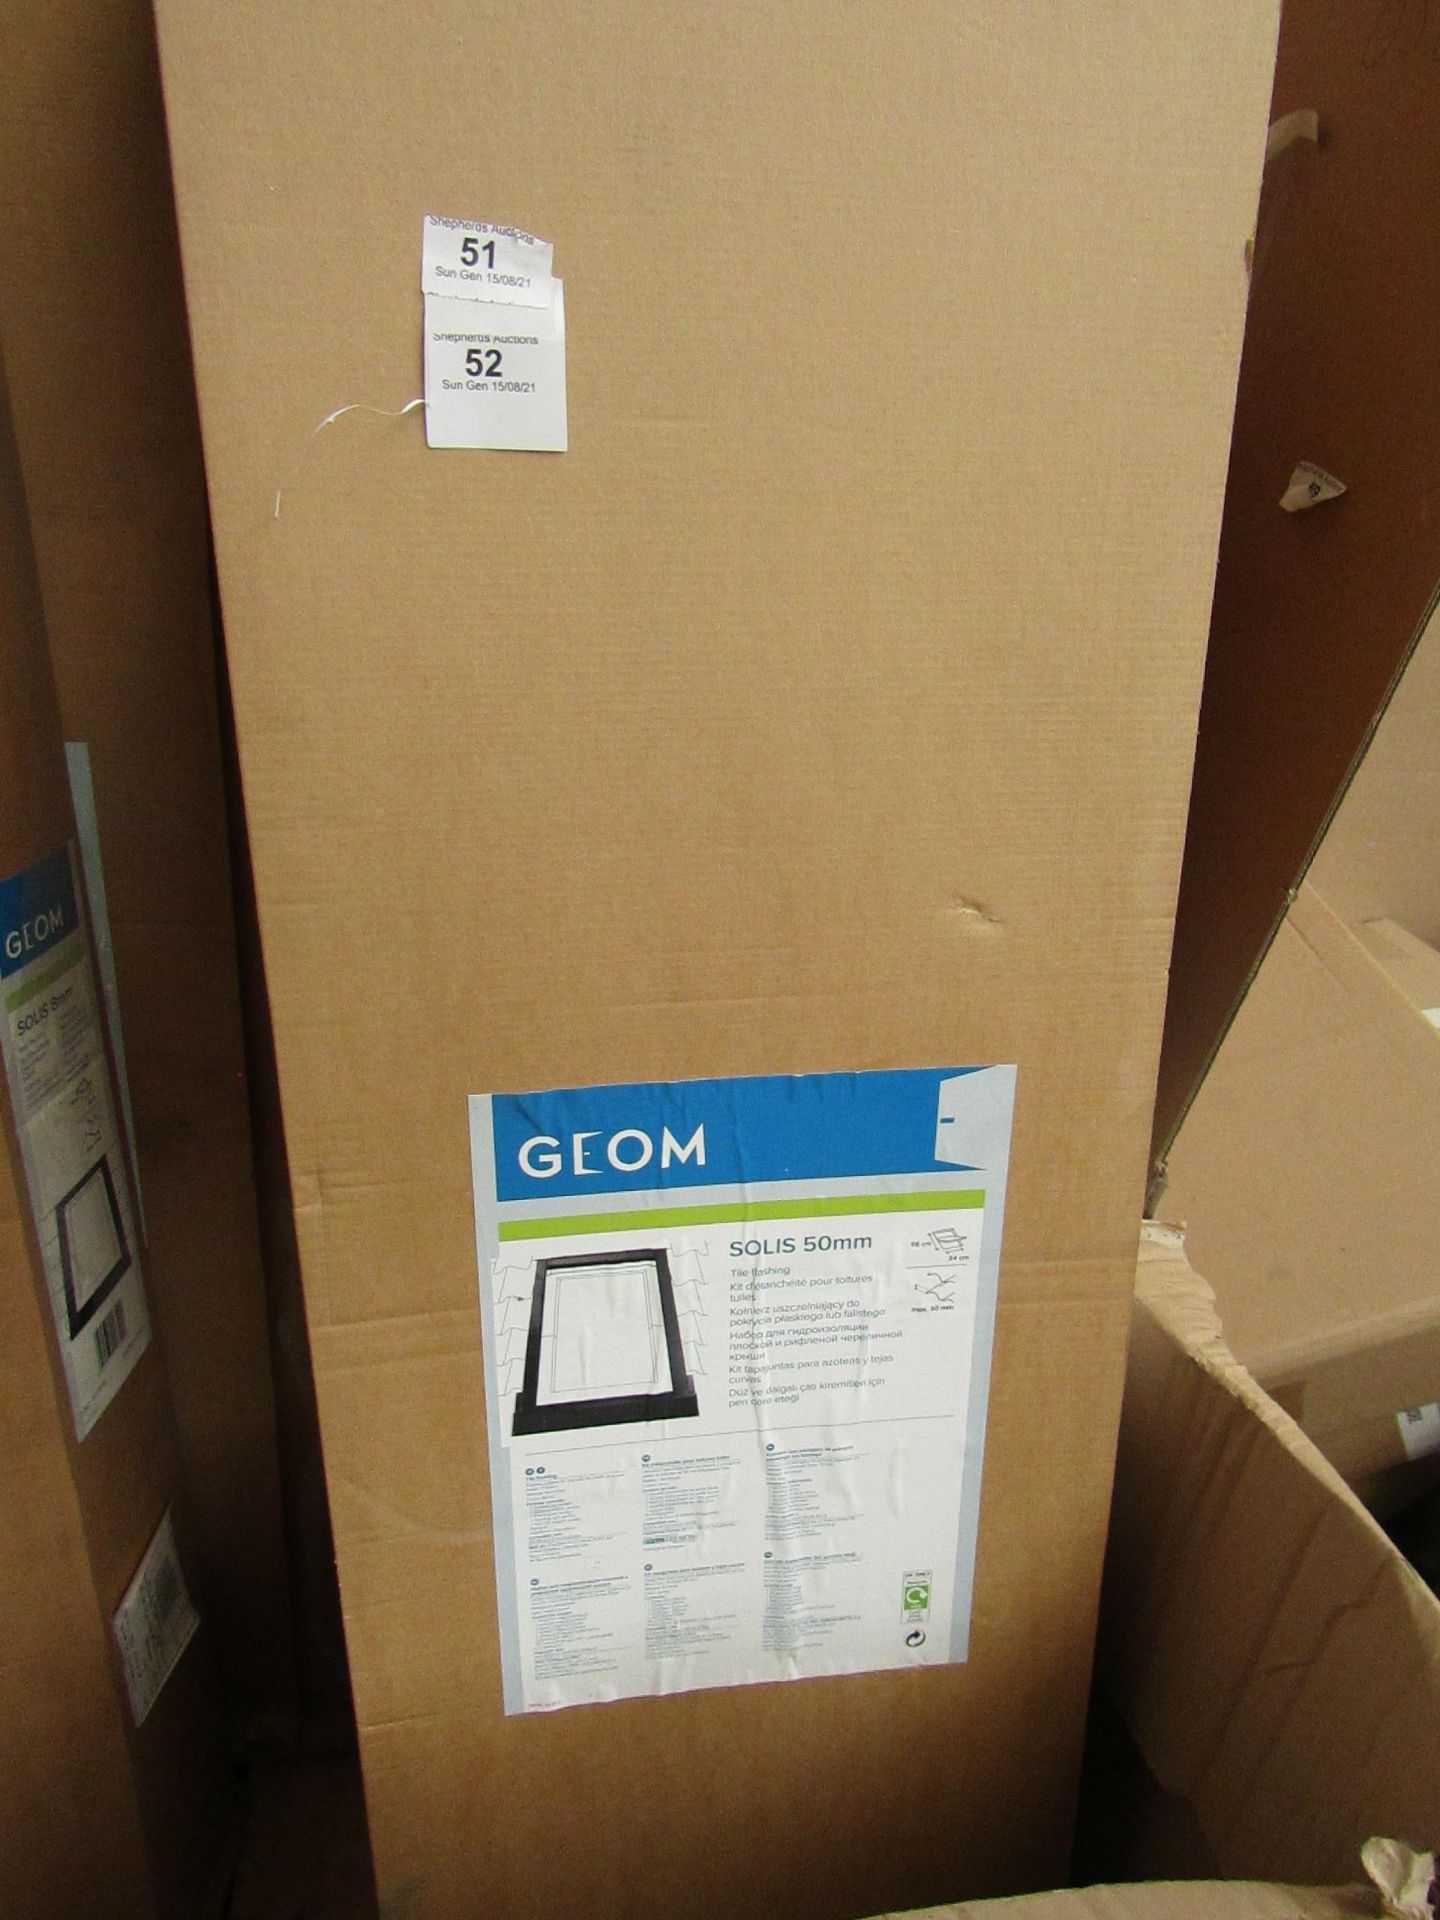 Geom - Solis 50mm Slate Flashing - Unchecked & Boxed.